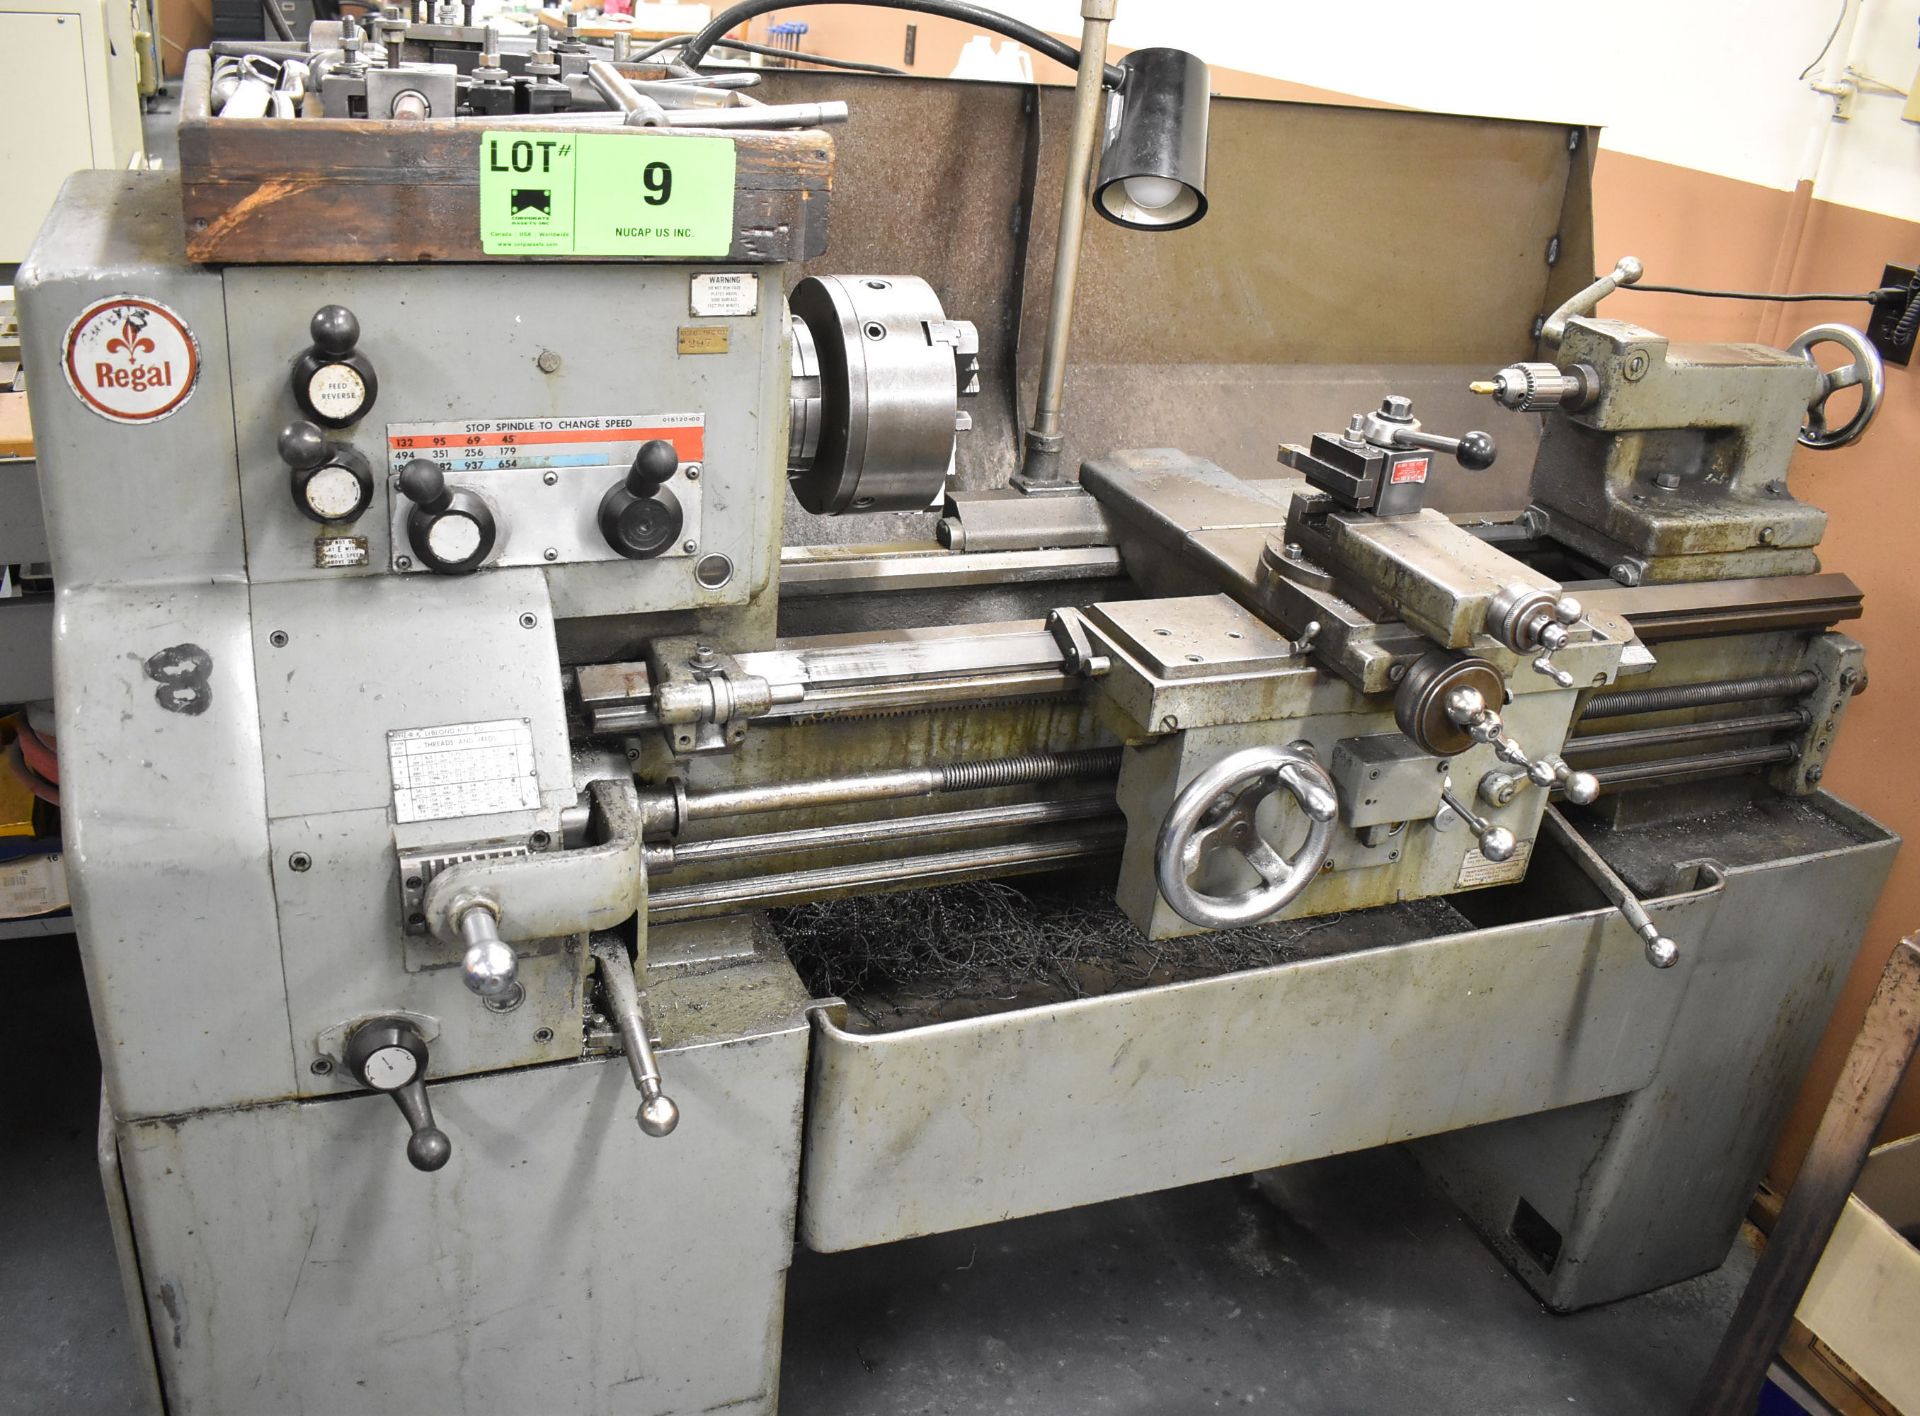 LEBLOND REGAL 16X30 ENGINE LATHE WITH 16" SWING OVER BED, 30" DISTANCE BETWEEN CENTERS, 1.5" SPINDLE